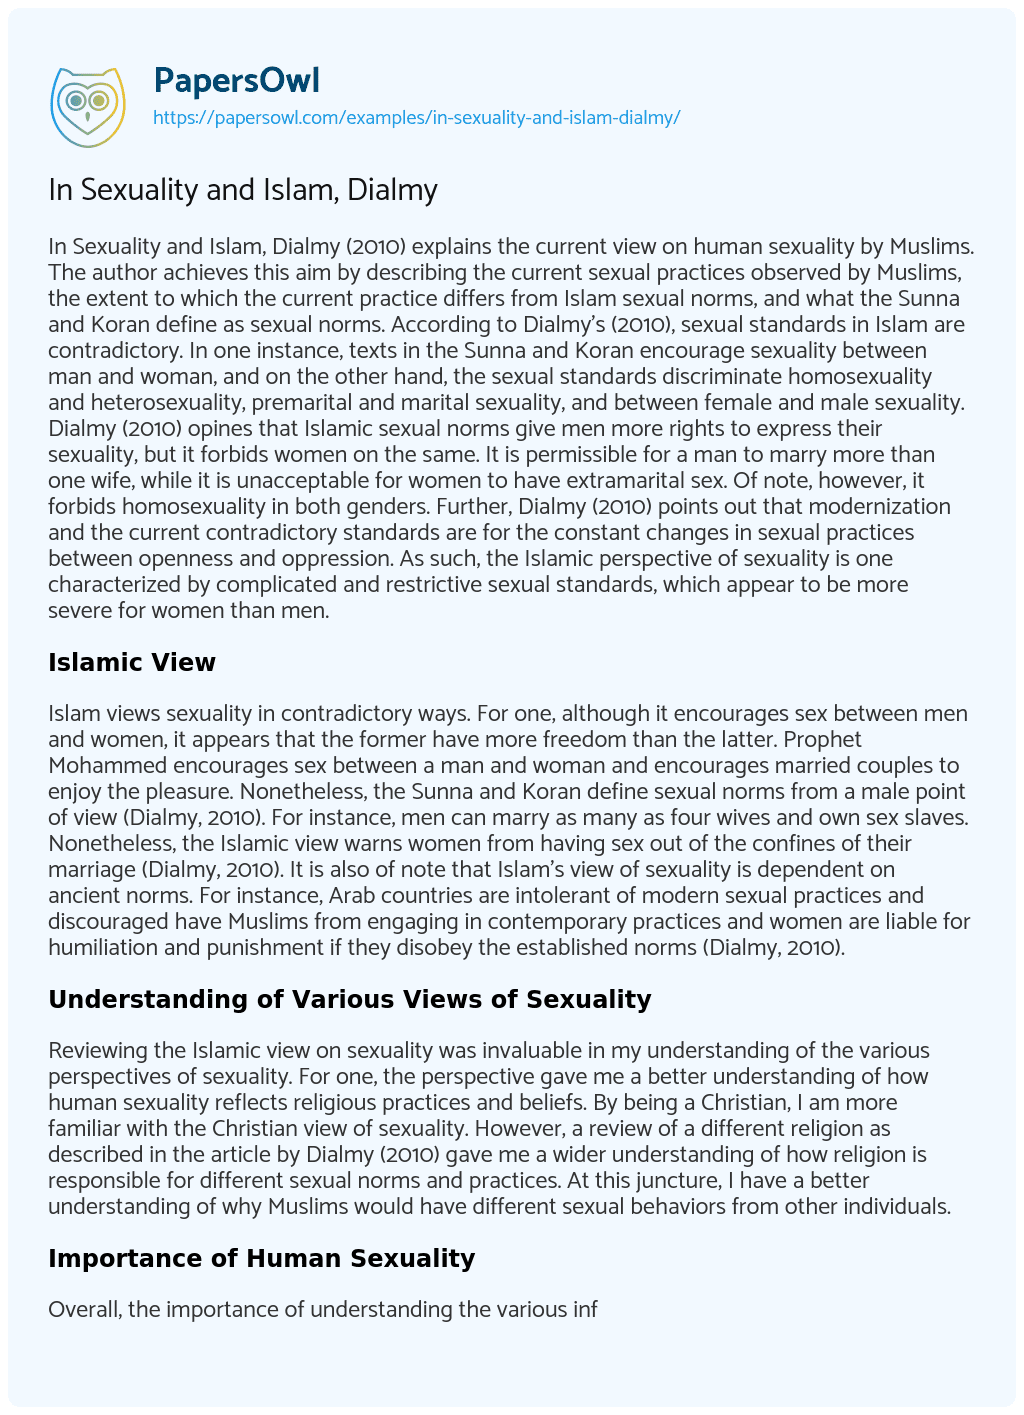 Essay on In Sexuality and Islam, Dialmy